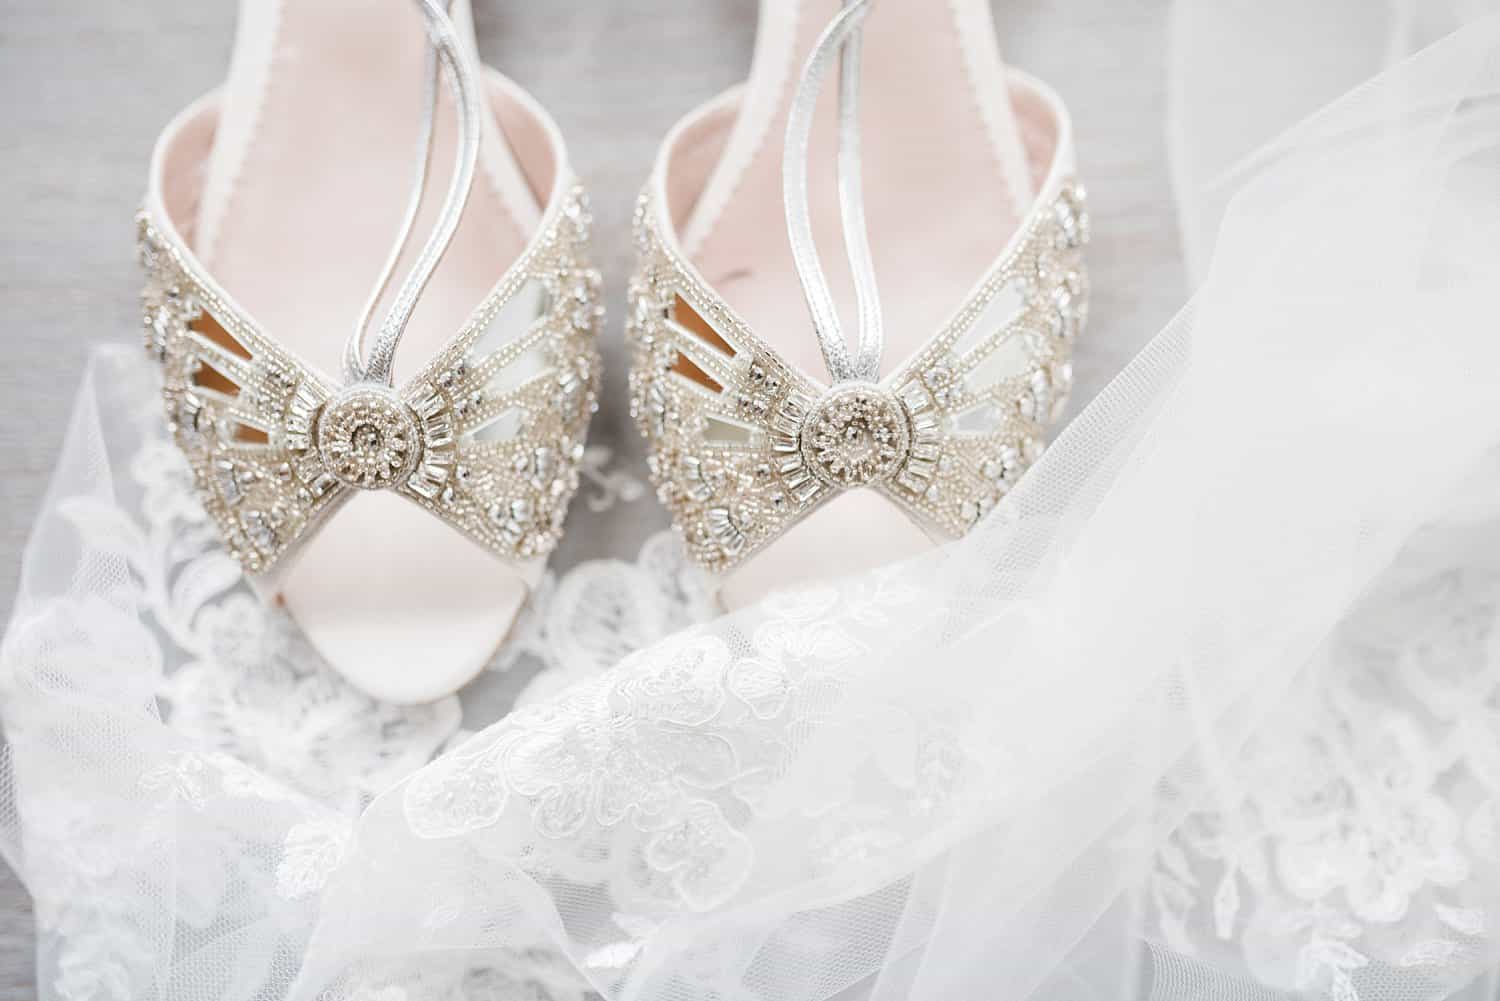 Our top 10 wedding shoes